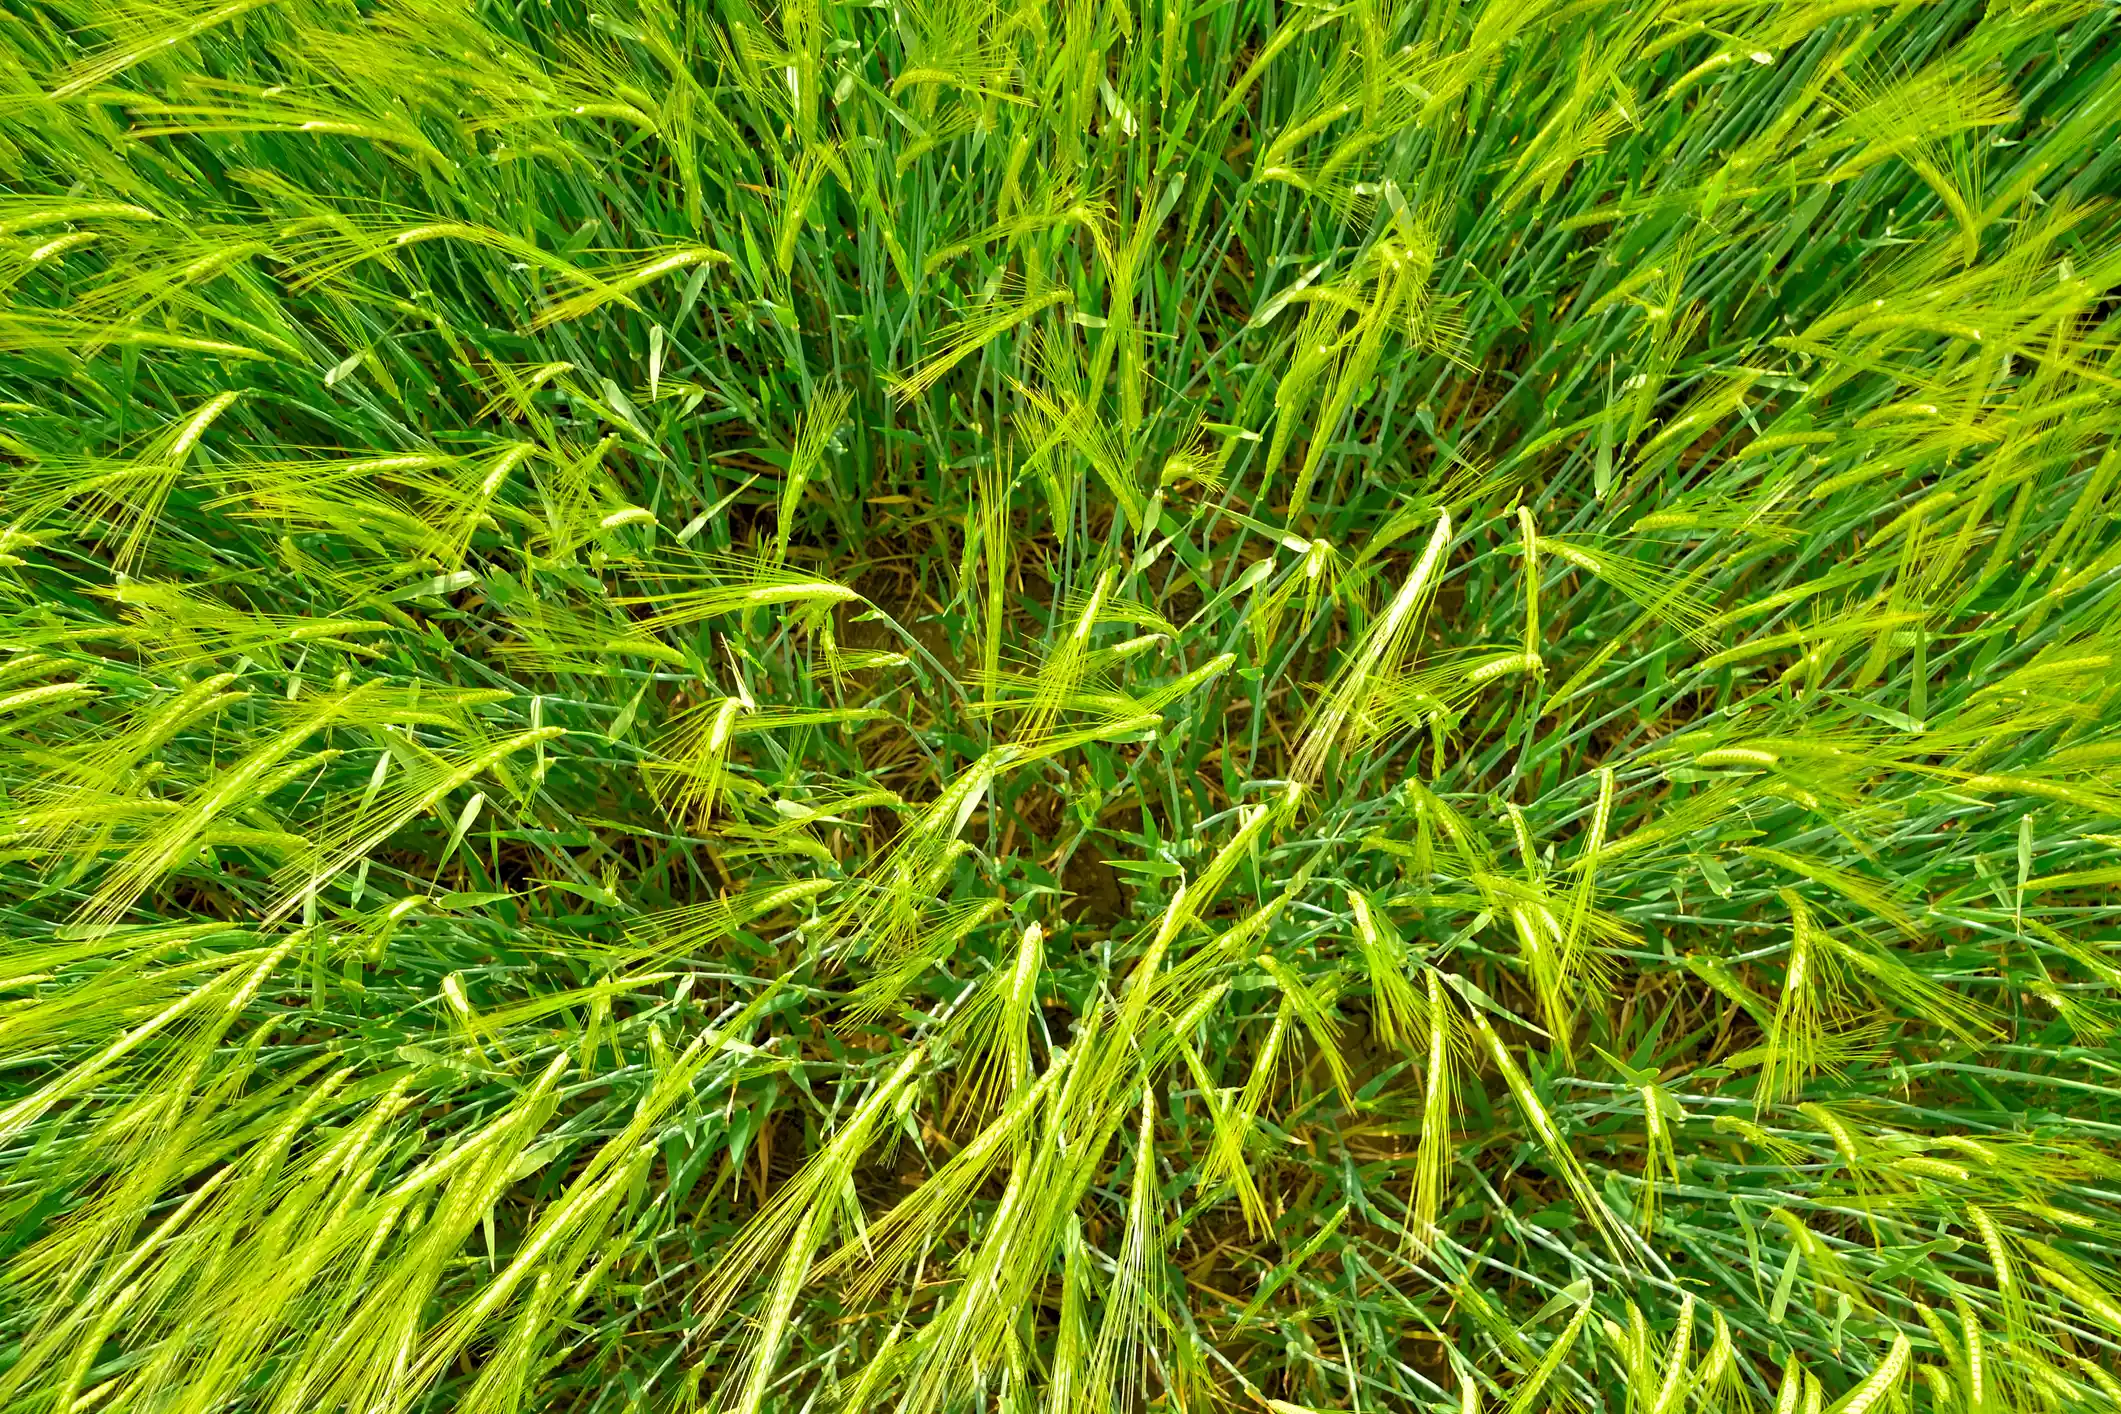 An overhead view of a patch of bright green wheatgrass